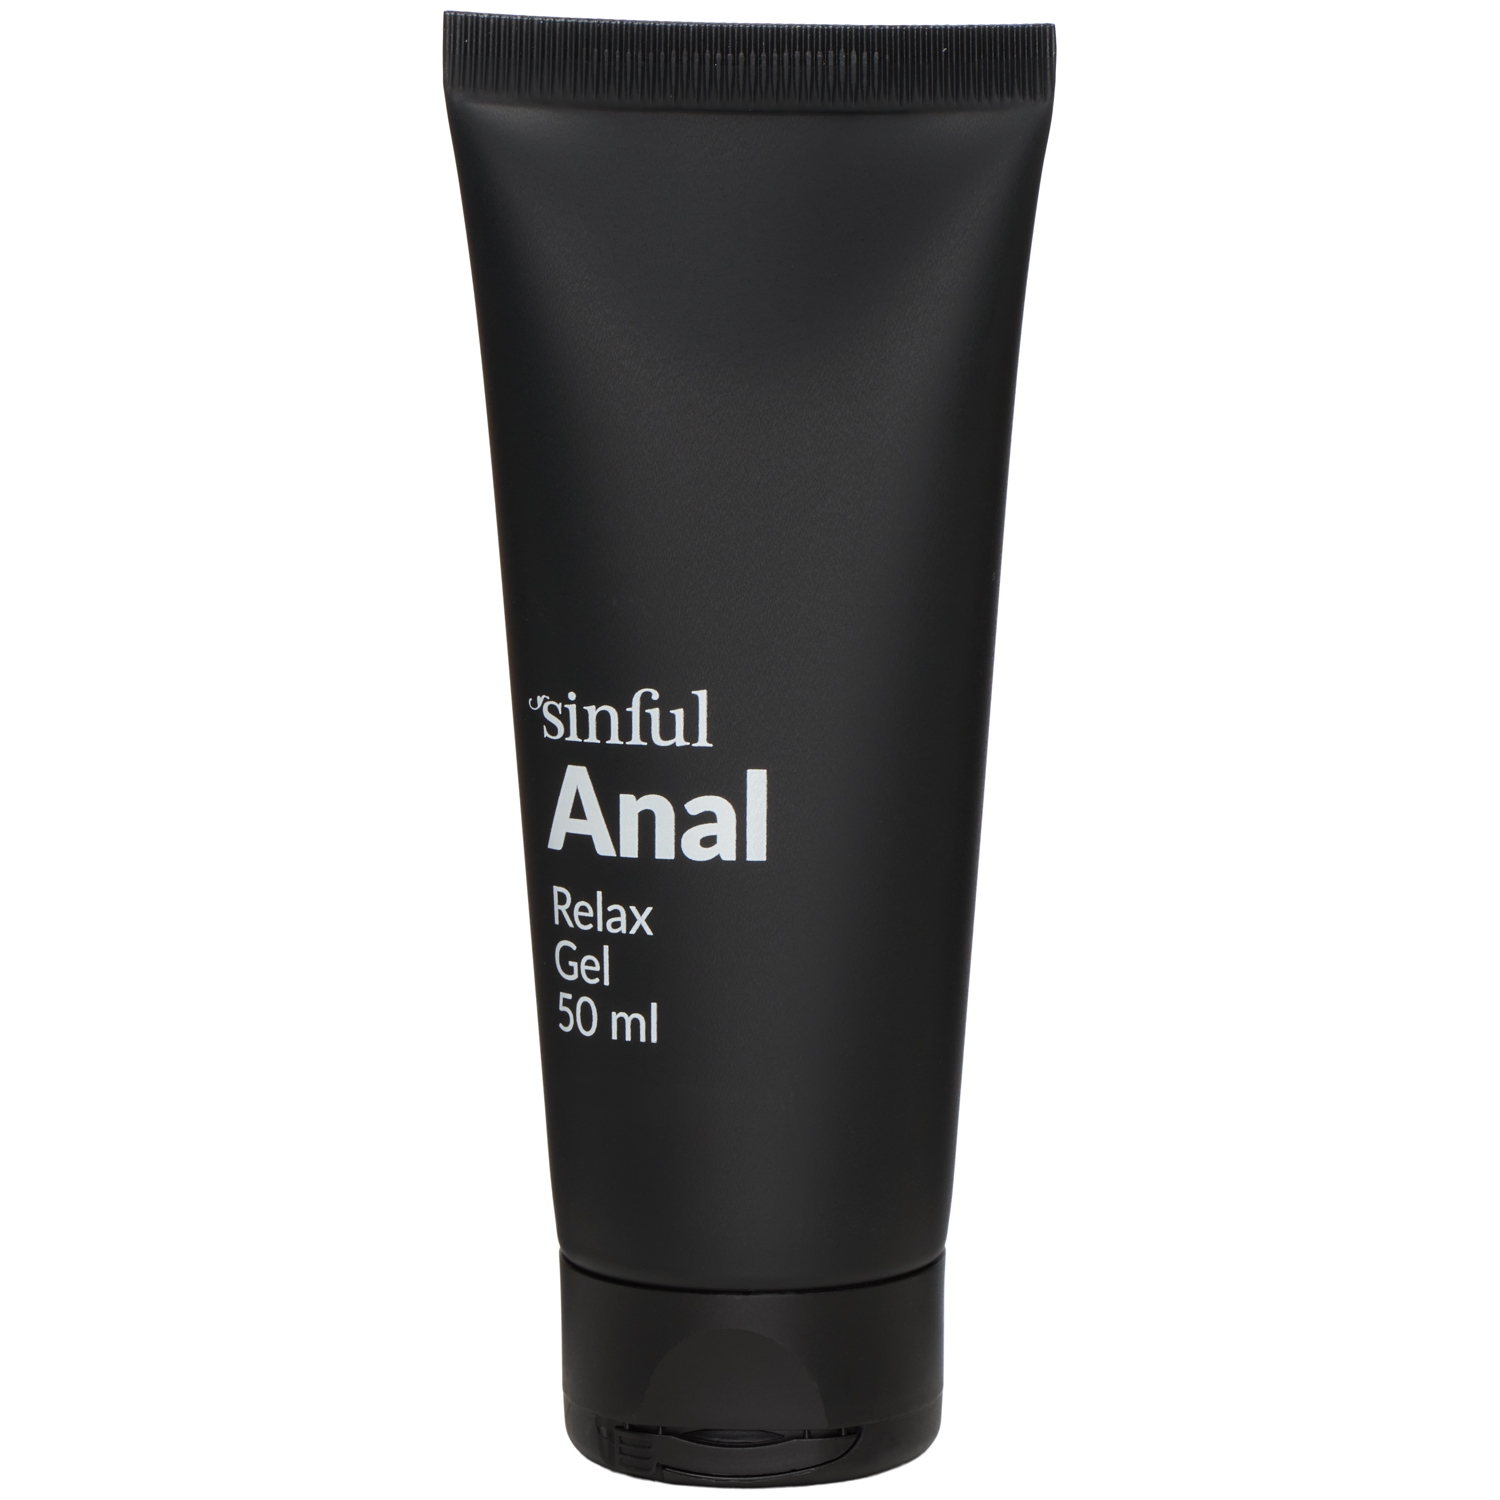 Sinful Anal Relax Gel 50 ml - Clear